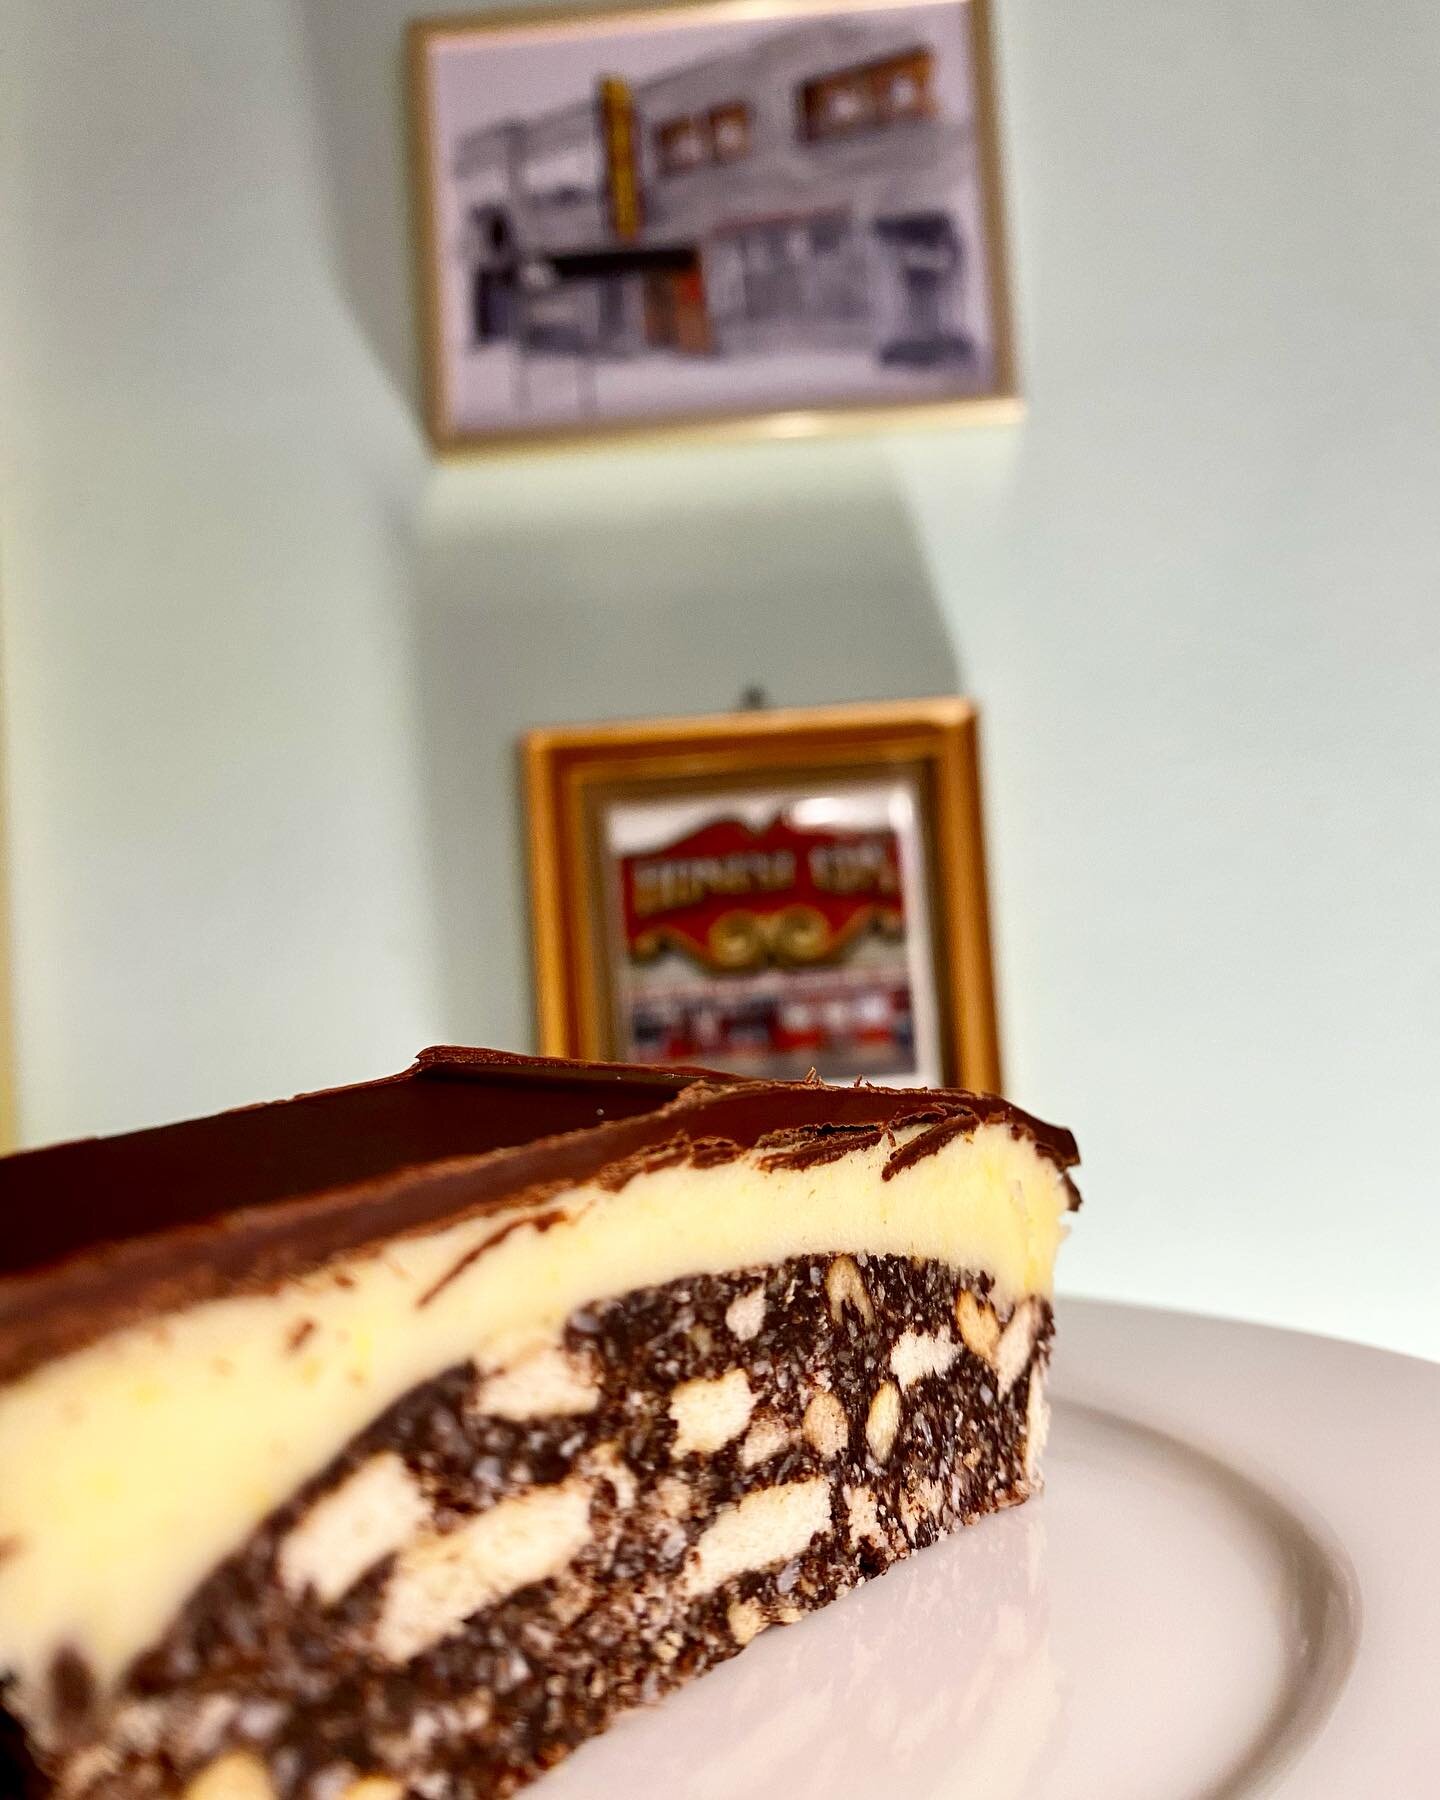 🎄🇨🇦🎄Homesick Canadians in Berlin, we can provide a piece of home for you! 
We have Nanaimo bars for sale everyday at the cafe, and we&rsquo;re accepting larger orders (more than 5) for next day fulfillment until the 22nd. DM us your orders!
.
.
.